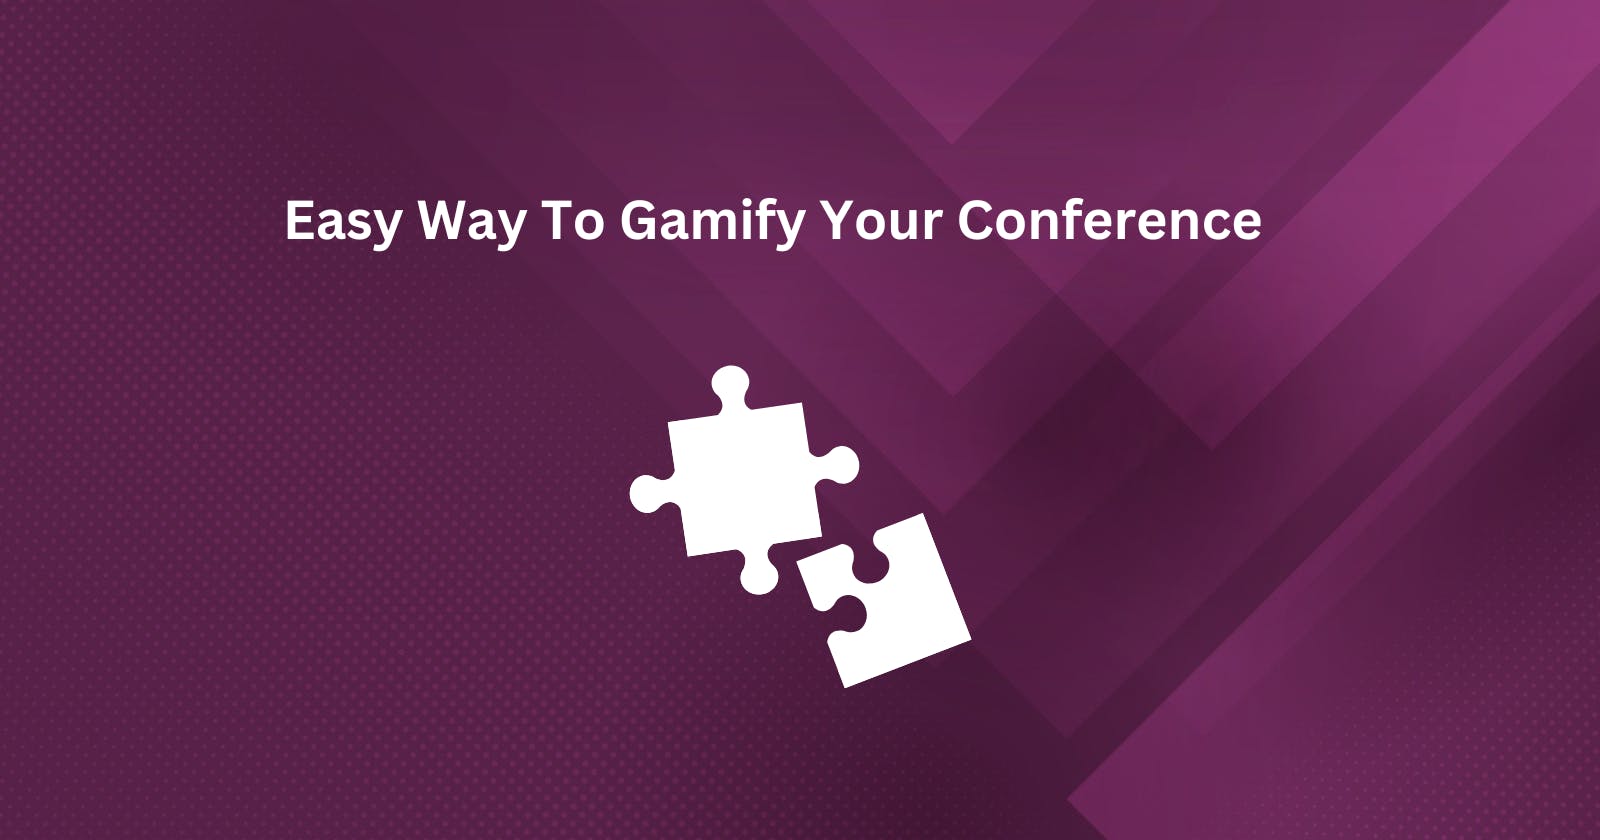 Easy way to gamify your conference